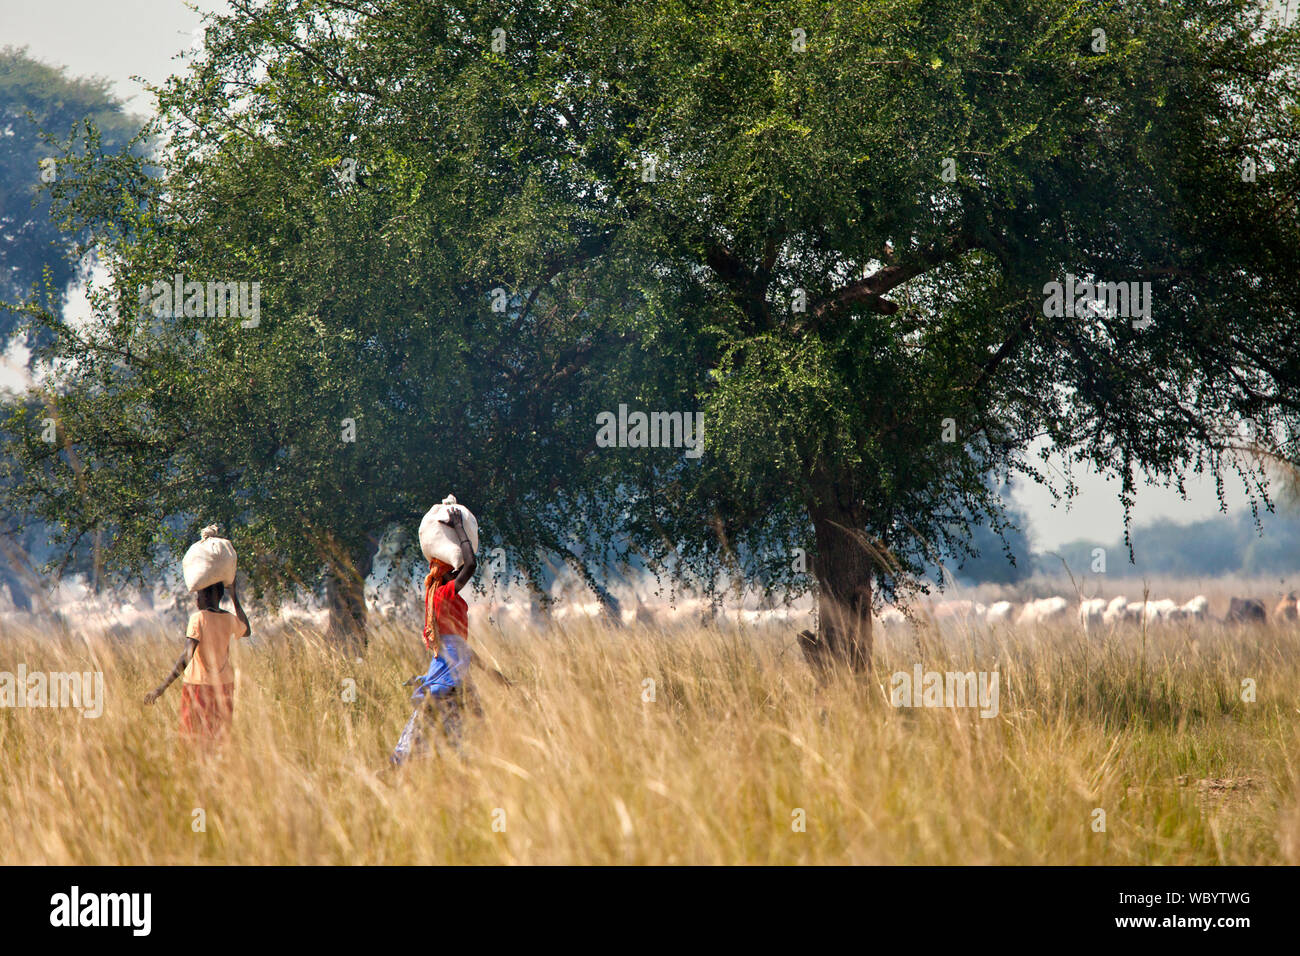 Women in colorful clothing carrying loads in rural South Sudan Stock Photo